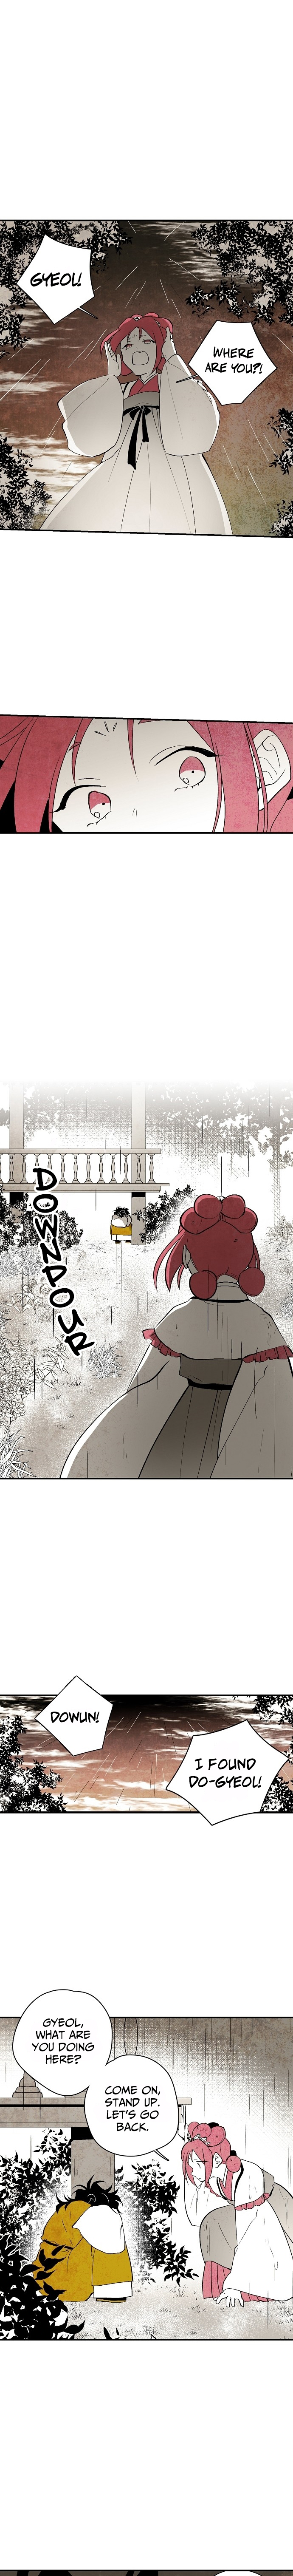 The Flower That Bloomed by a Cloud ch.14